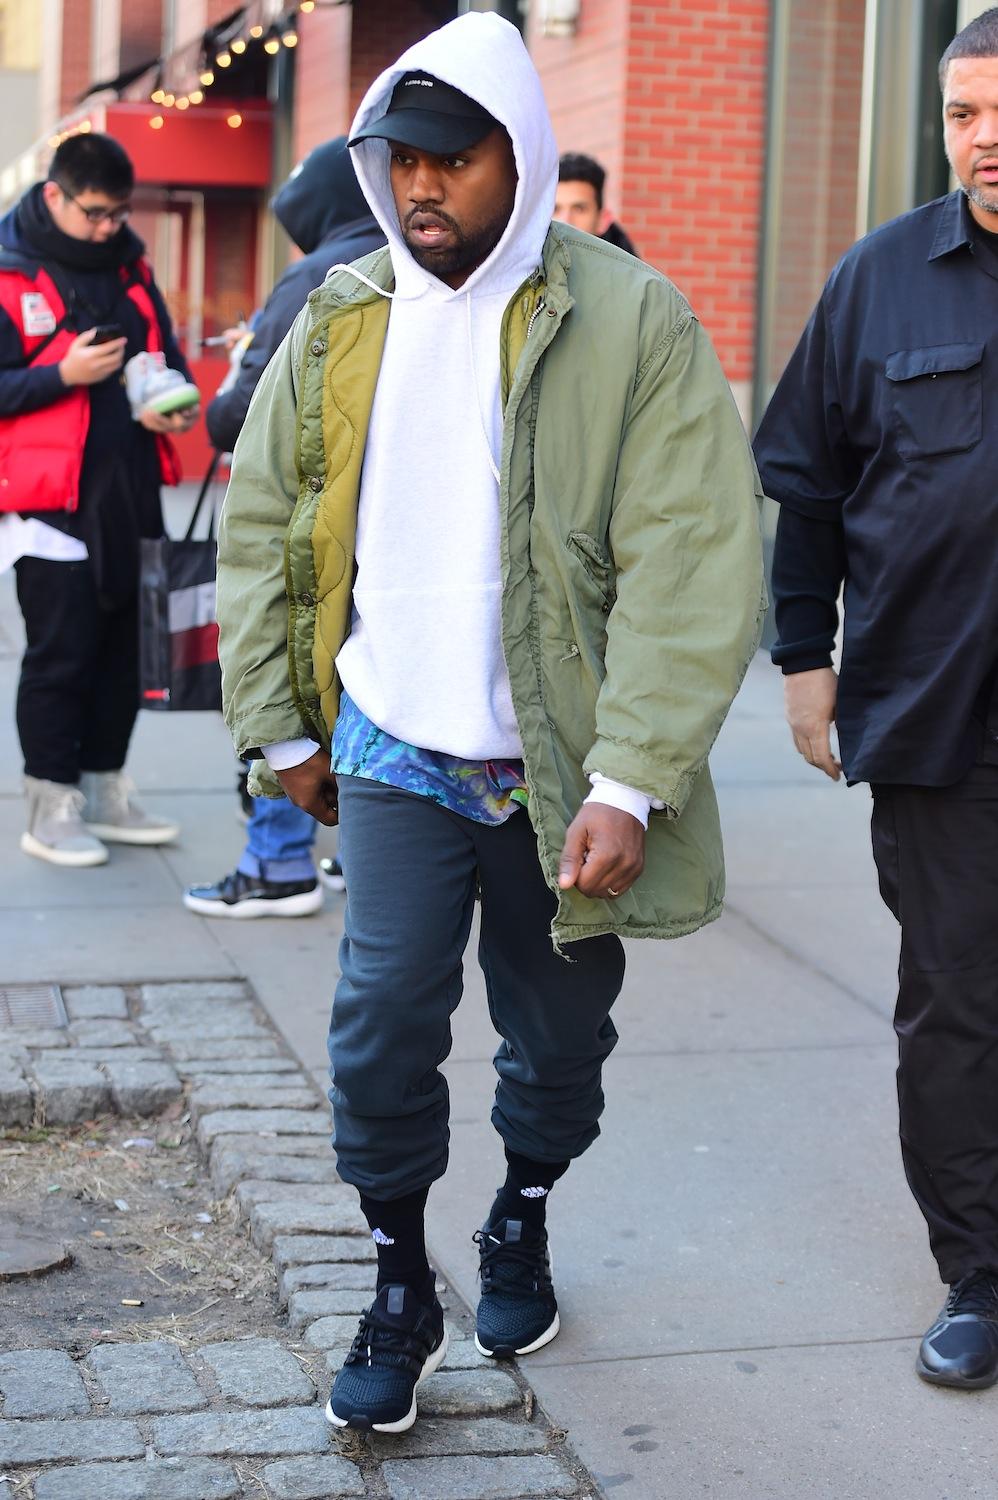 jamón Bonito Trueno Sneaker War?! Kanye West Forbids Kylie Jenner From Signing Deal With Puma